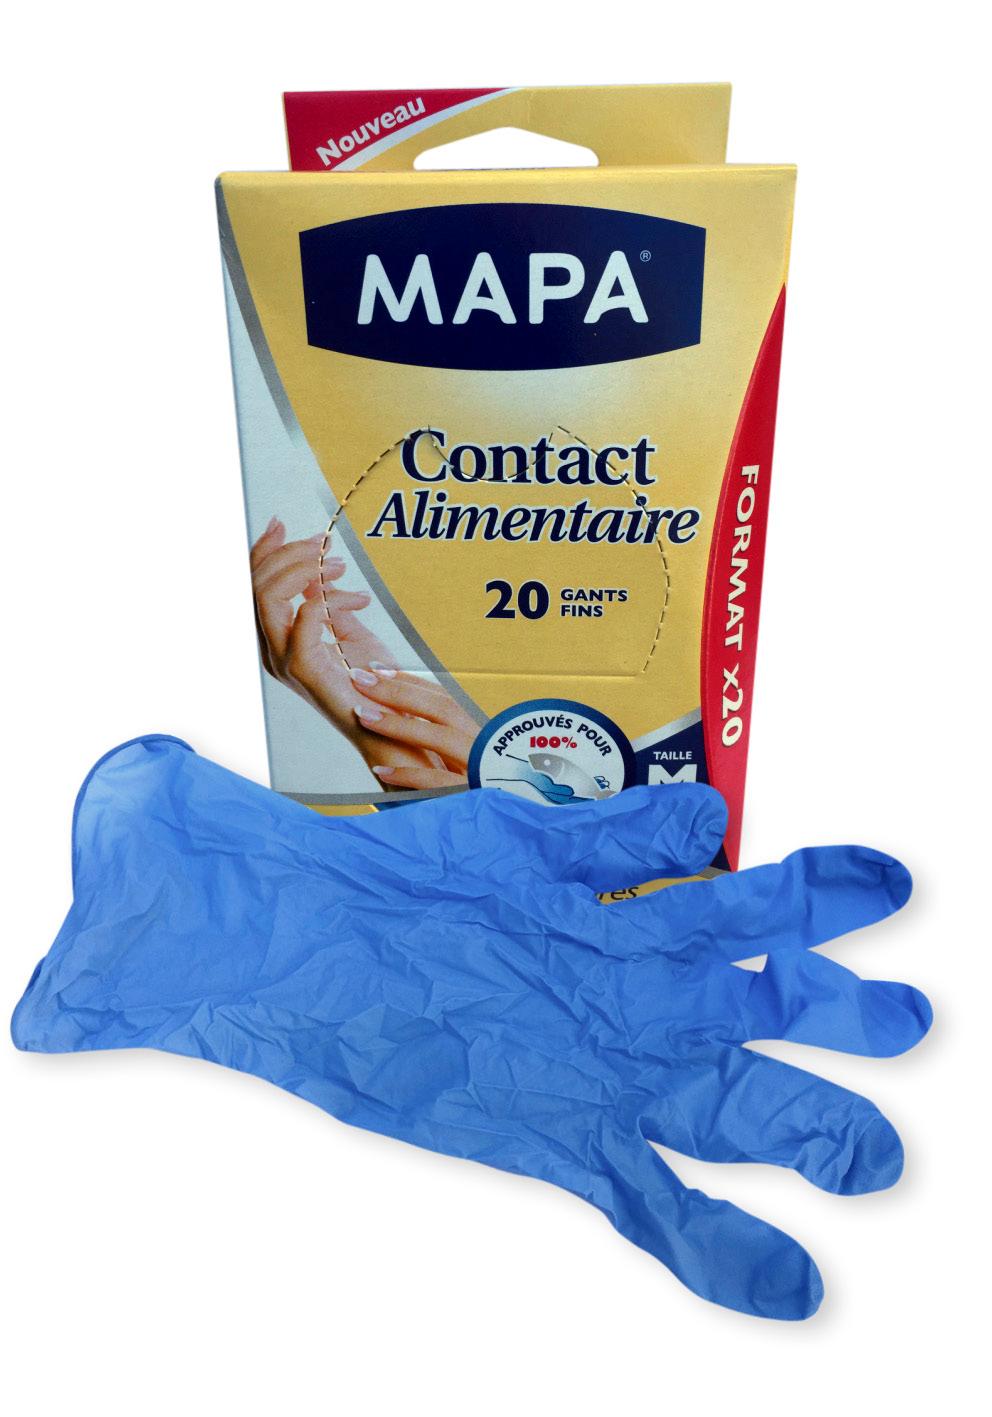 Gloves 40 s Outer Pack Quantity: 6 Packs EAN Code: 8001700992277 FOOD CONTACT DISPOSABLE GLOVES 20 S Nitrile blue disposable gloves for all food handling Laboratory tested for all types of food